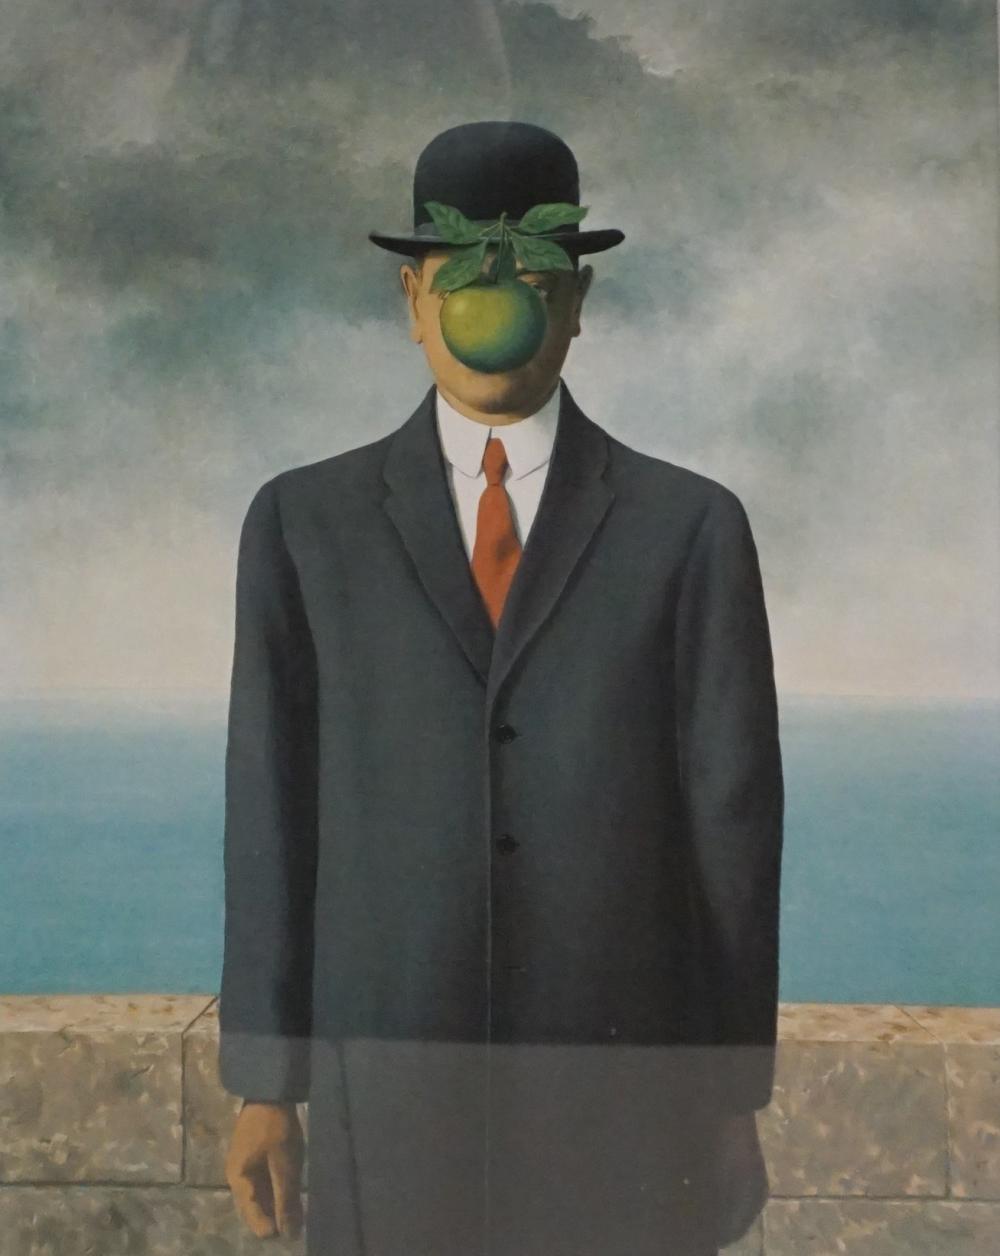 AFTER RENE MAGRITTE, 'THE SON OF